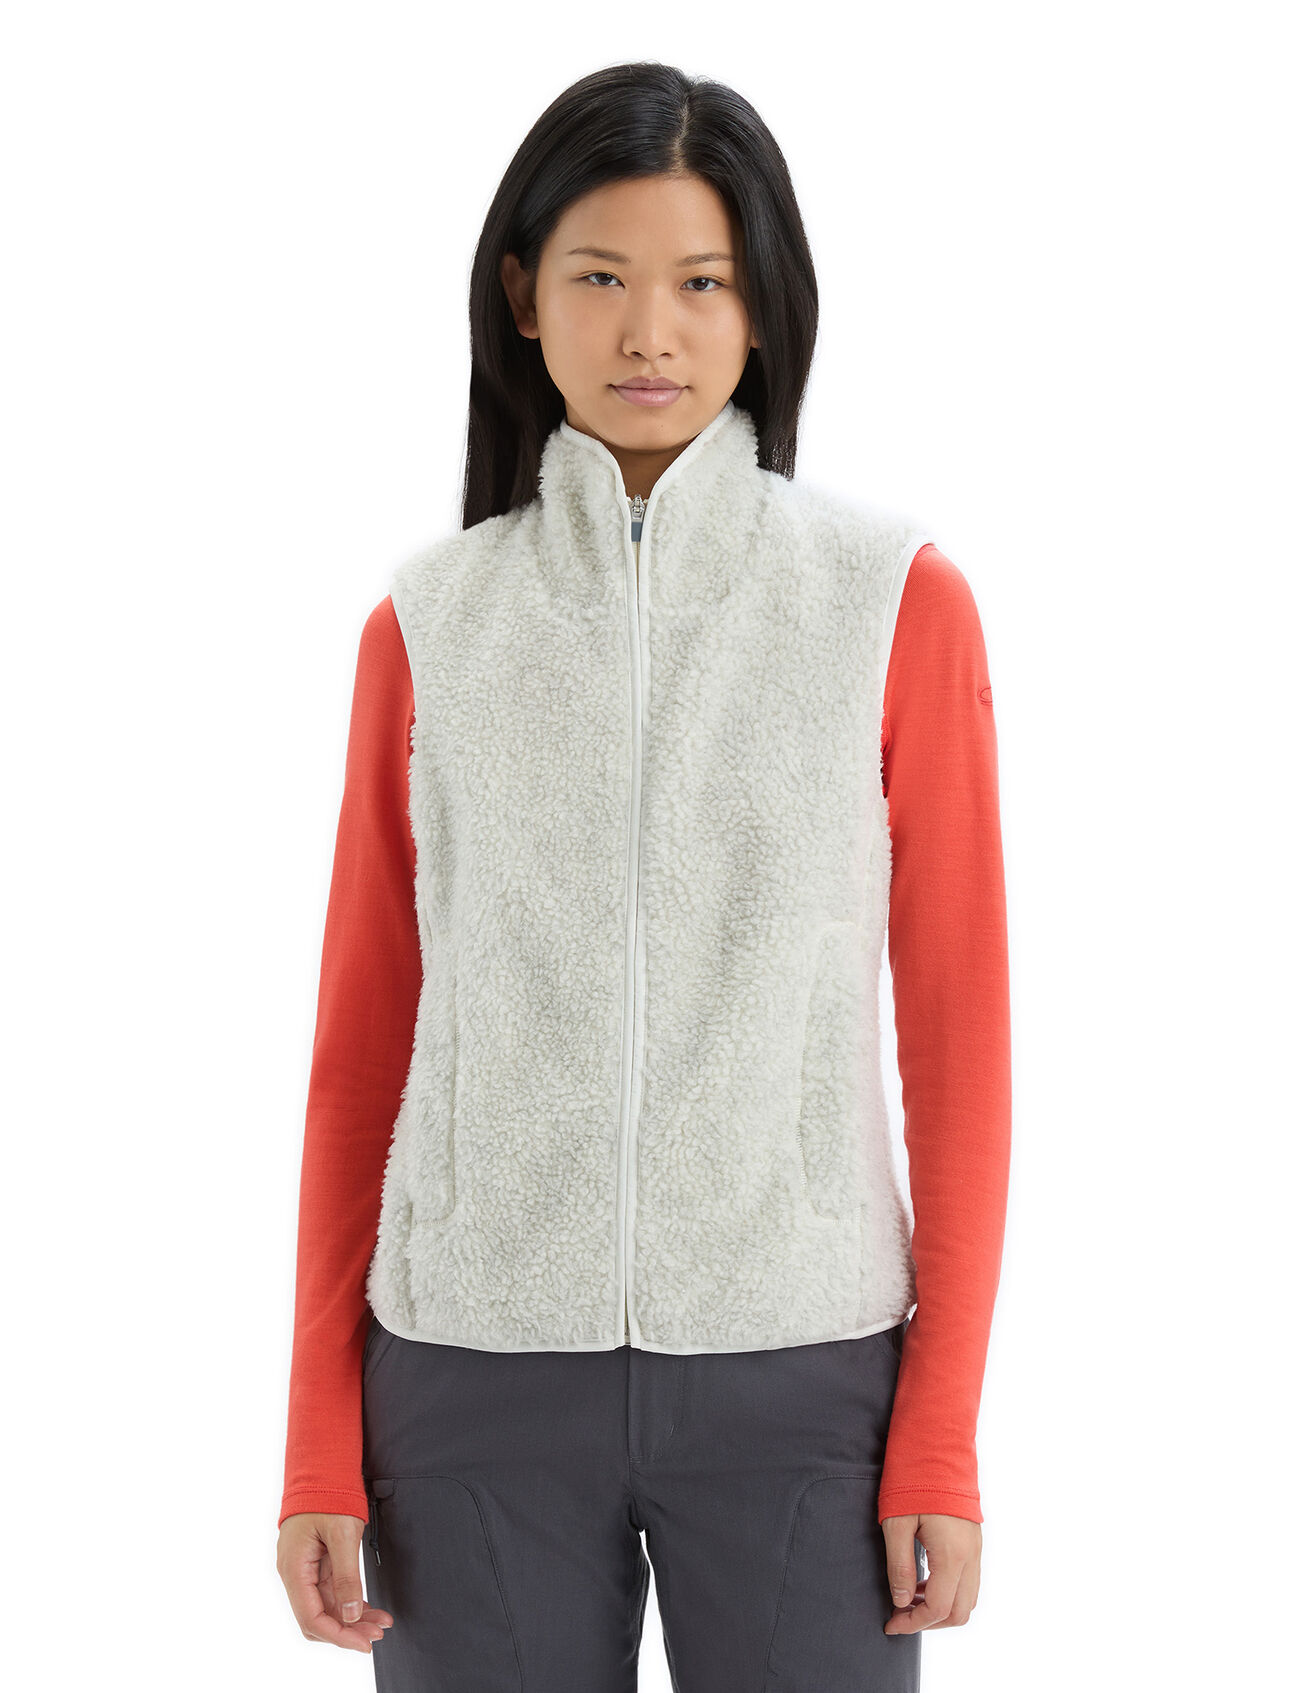 Womens RealFleece™ Merino High Pile Vest A regular-fit merino fleece vest designed for year-round warmth and comfort, the RealFleece™ High Pile Vest adds the perfect dose of core insulation for any active pursuit.